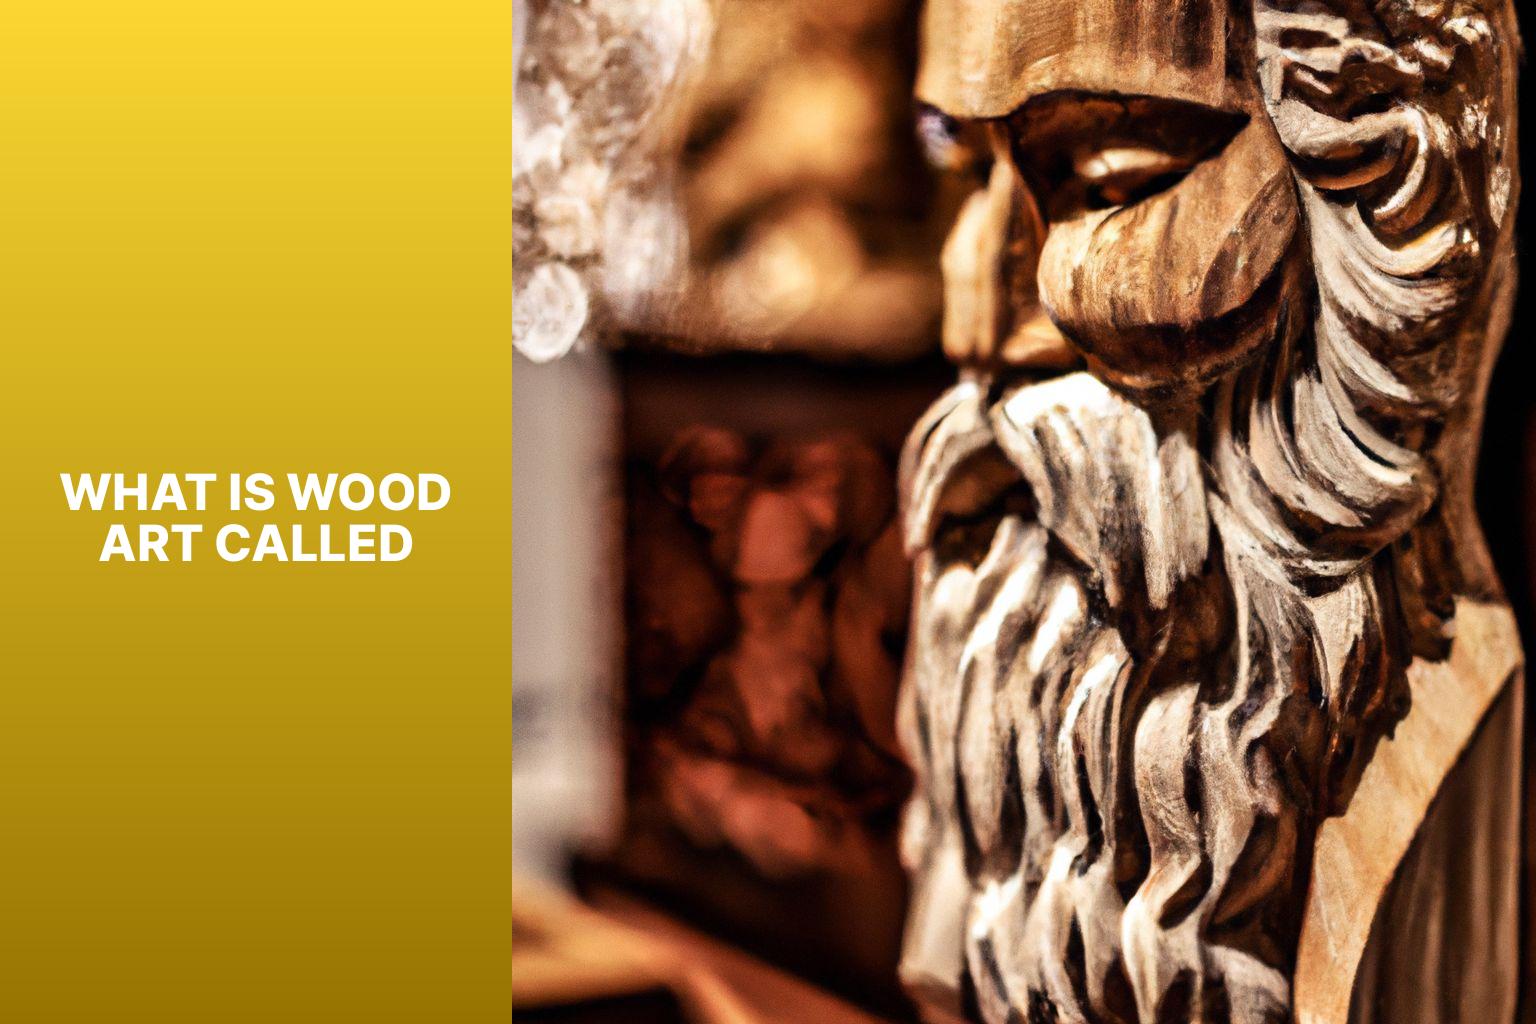 Carved Walnut Wood: Choosing, Carving, and Creating Masterpieces